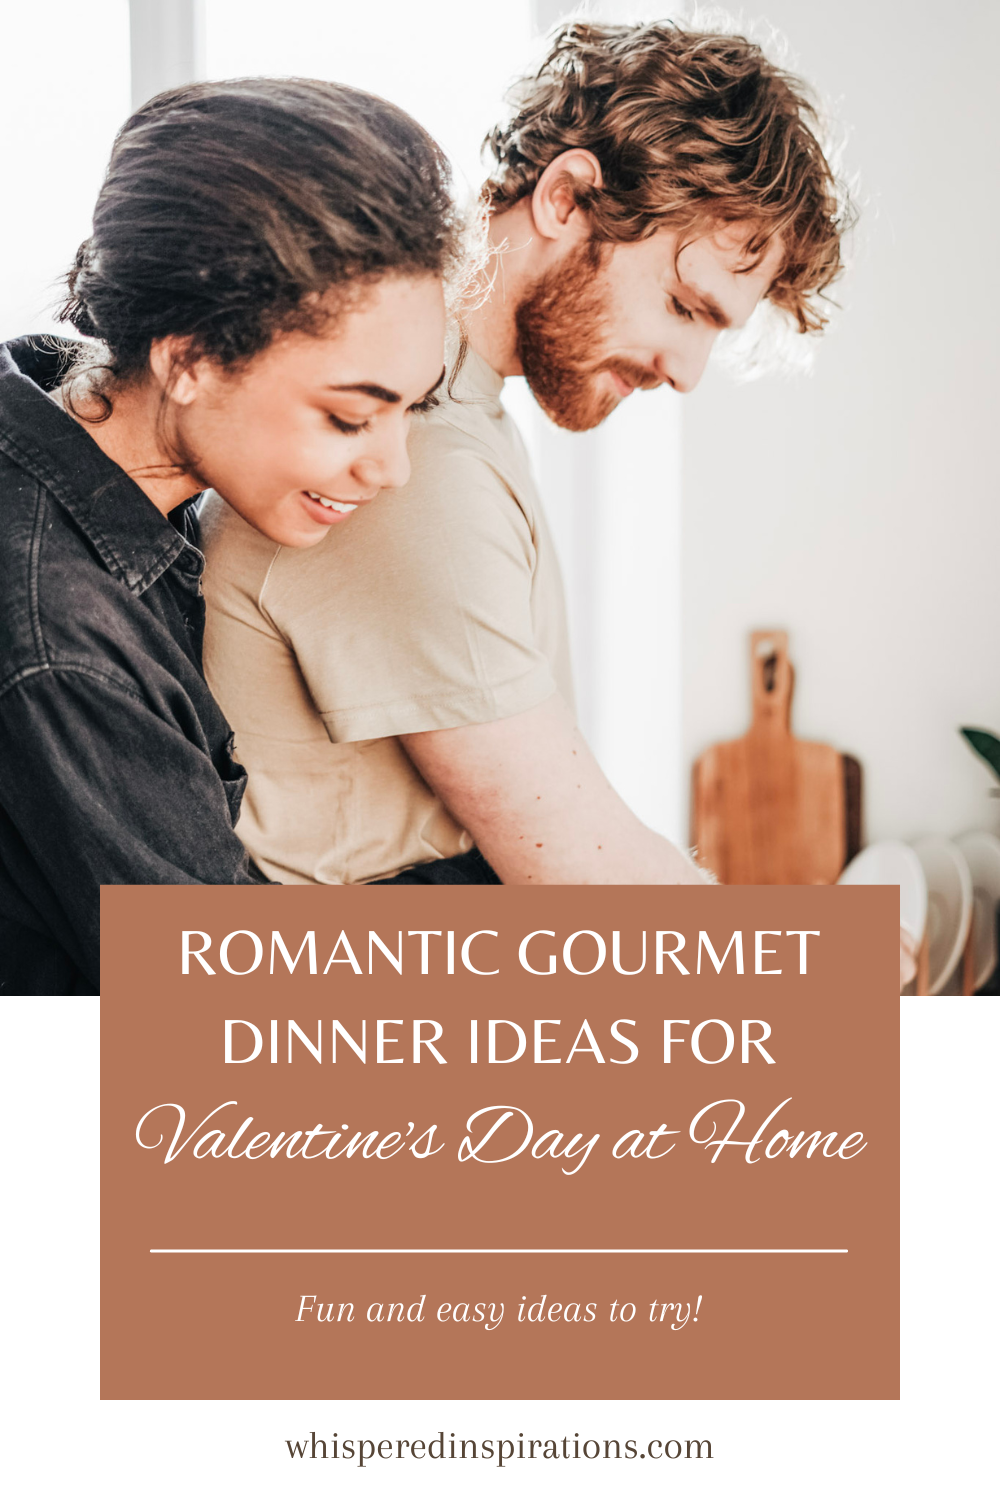 A woman and man embrace and cook together. The woman is hugging the man from behind while the man prepares food. This article covers romantic gourmet dinner ideas for a perfect Valentine's Day at home. 